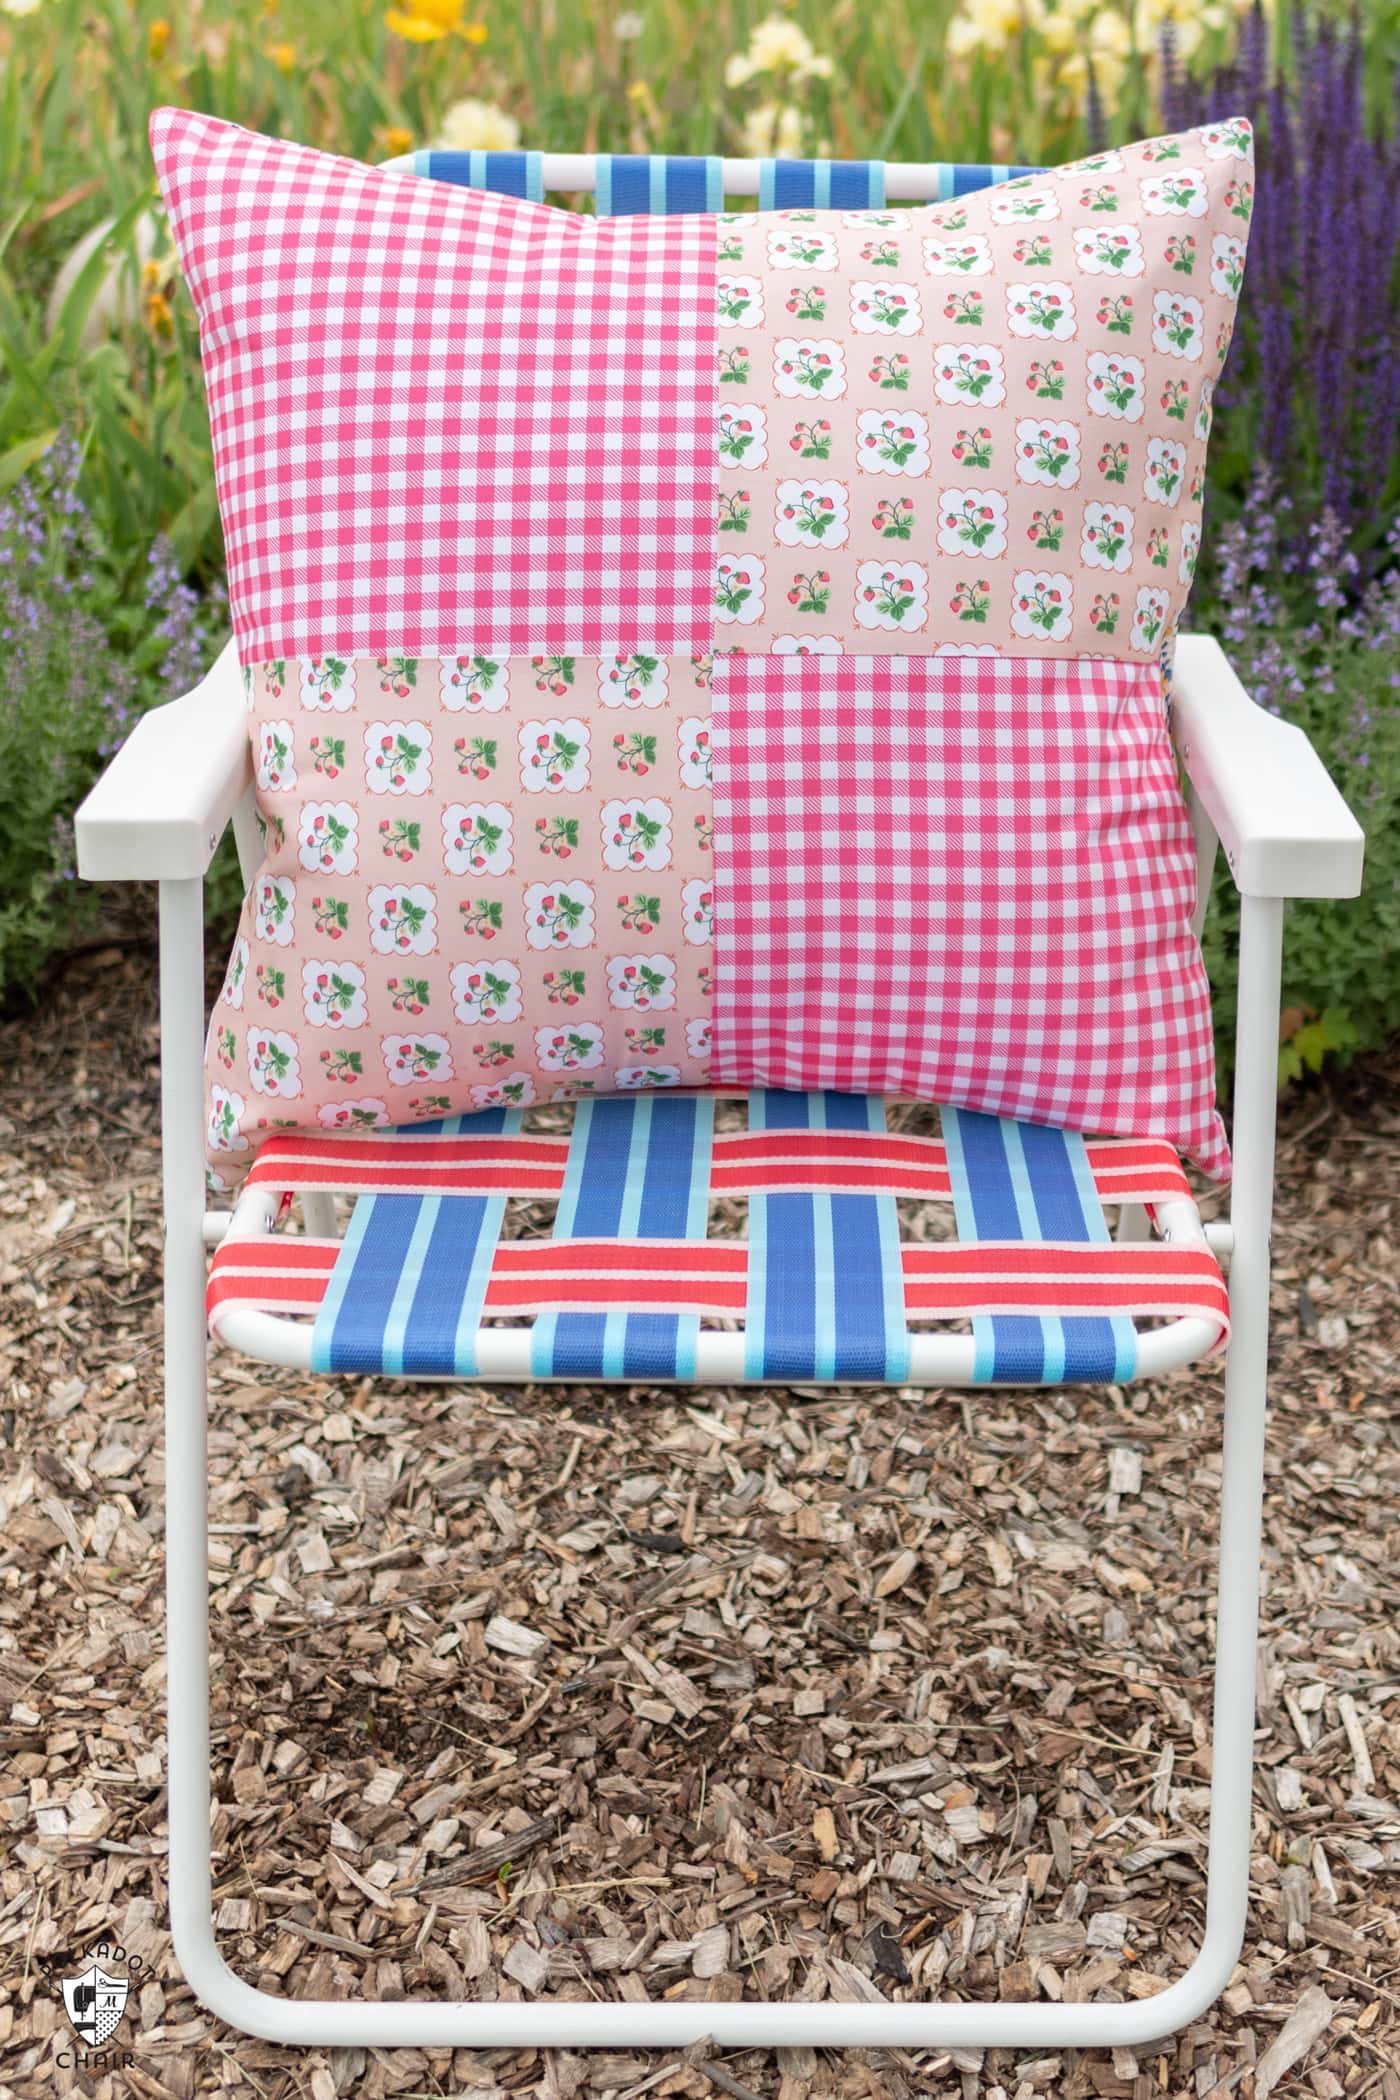 large pink pillow on outdoor lawn chair